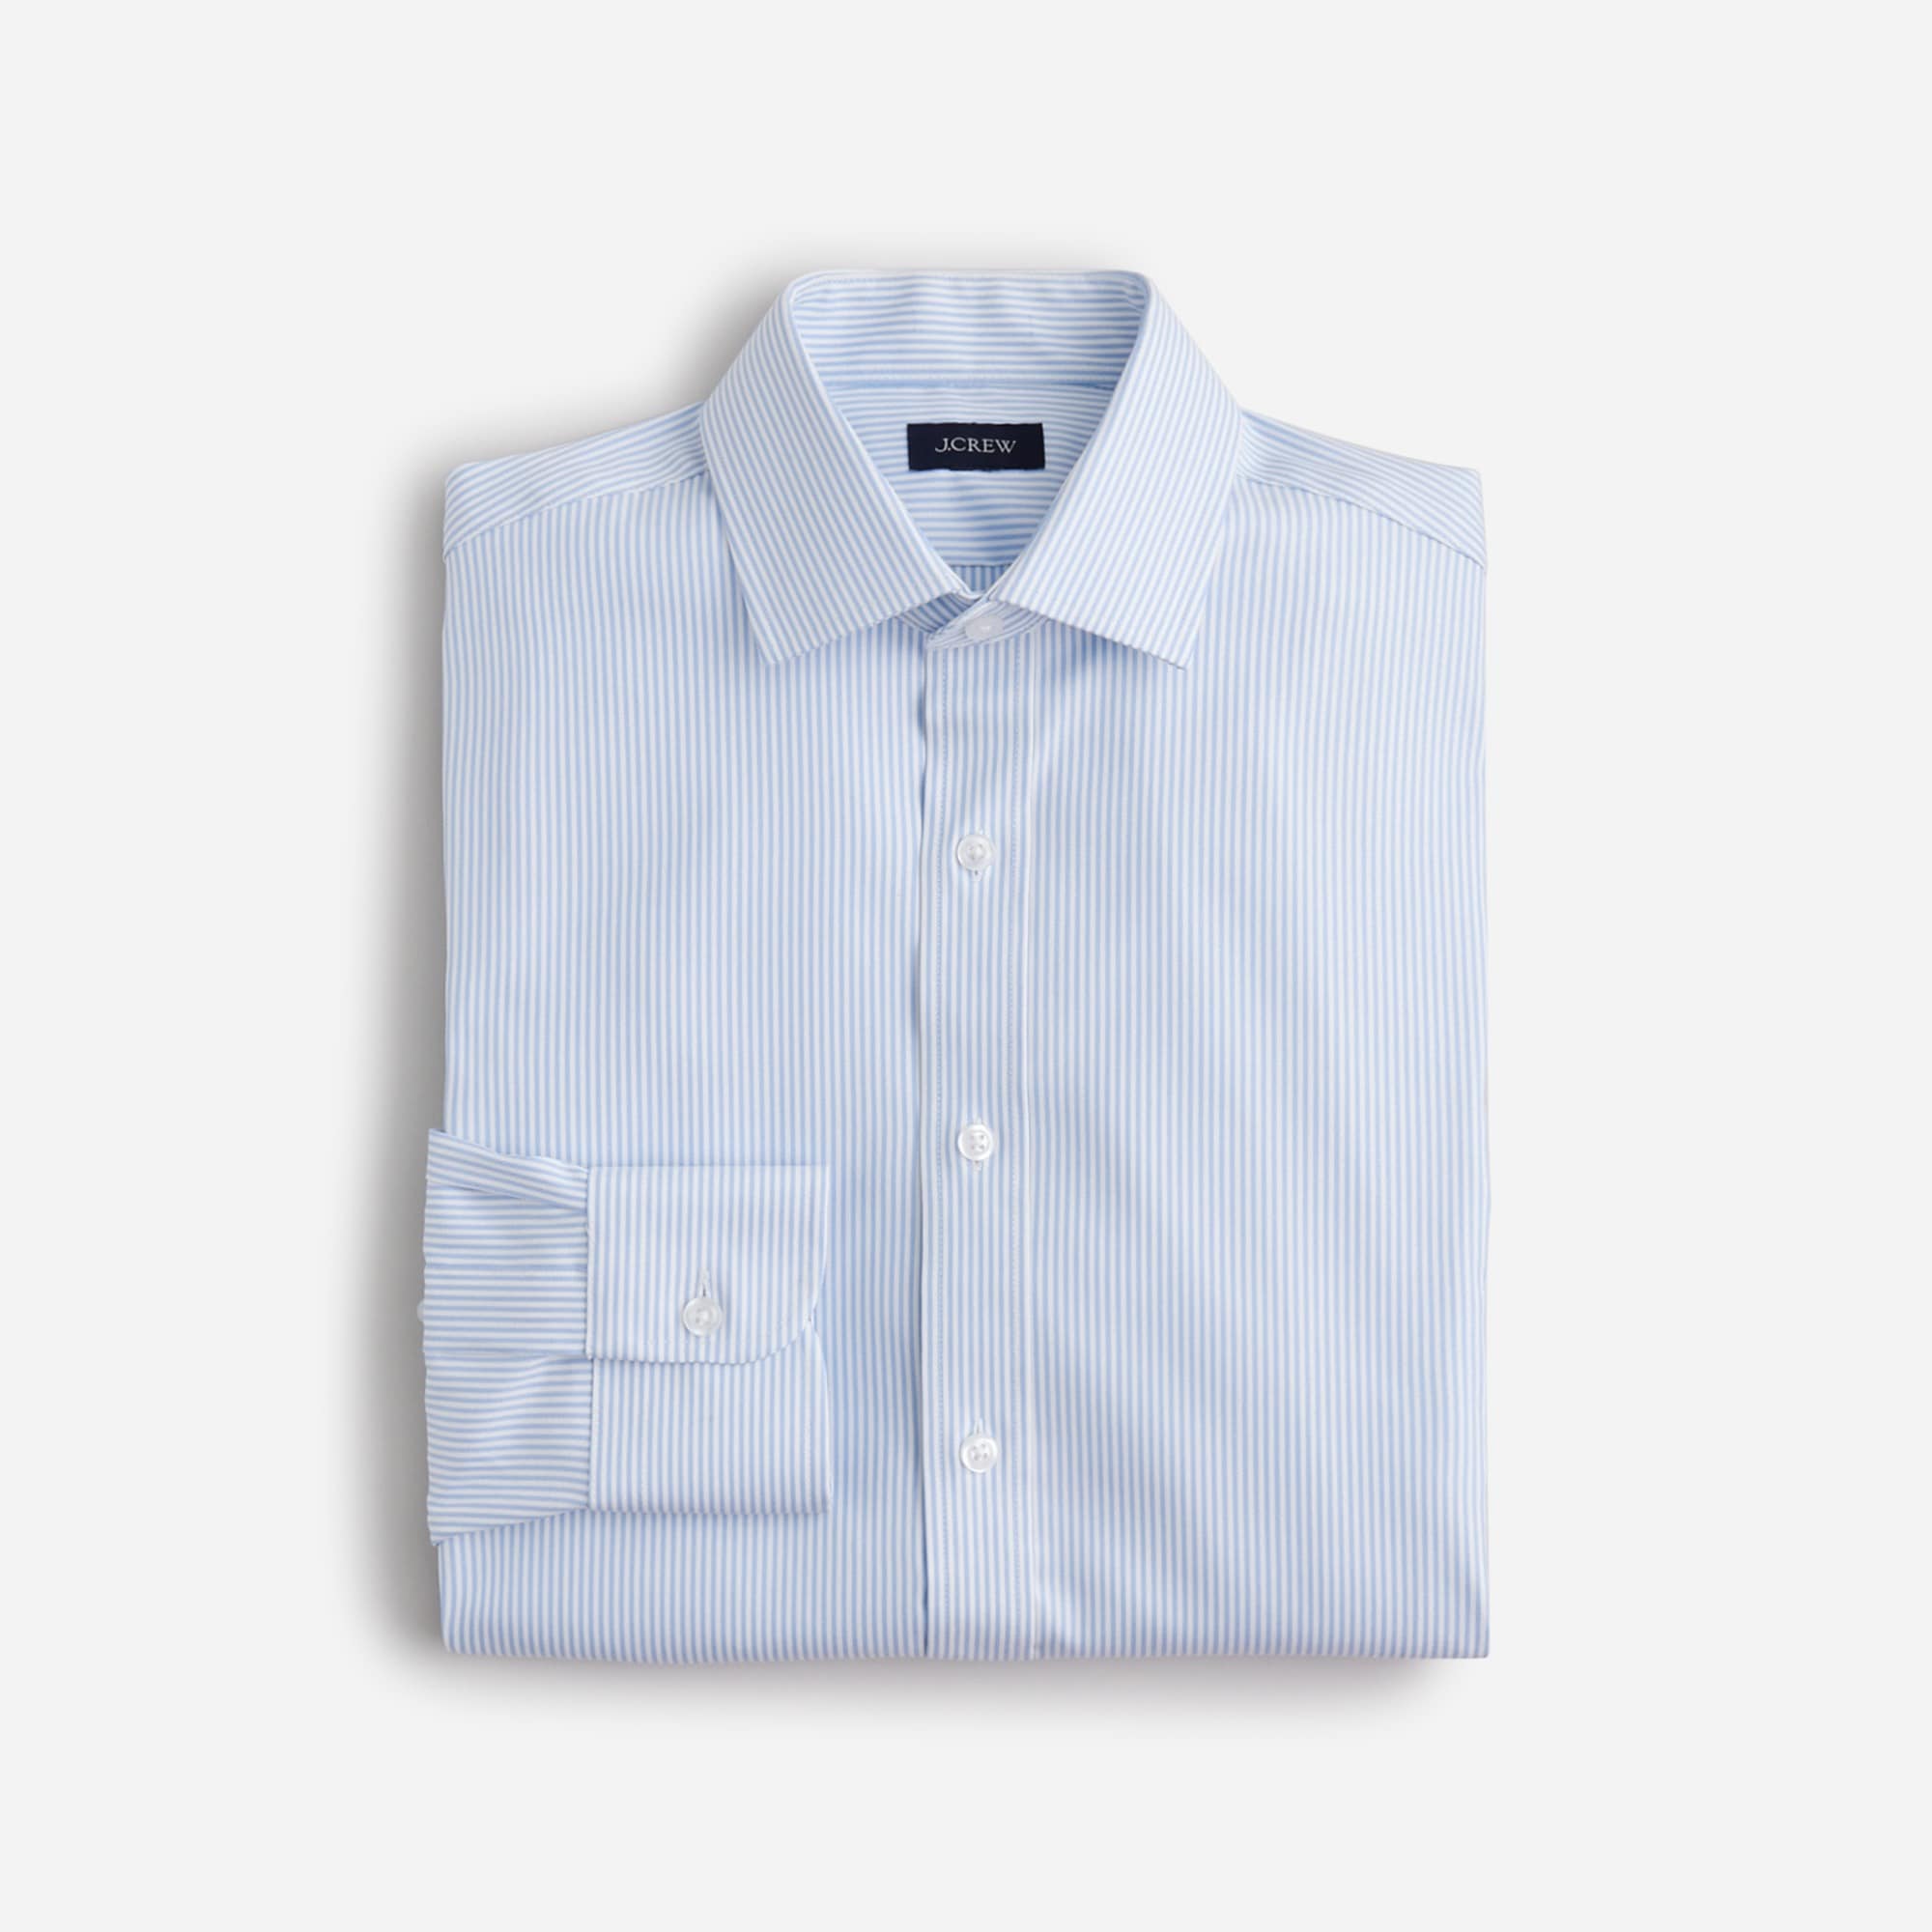 mens Bowery performance stretch dress shirt with spread collar